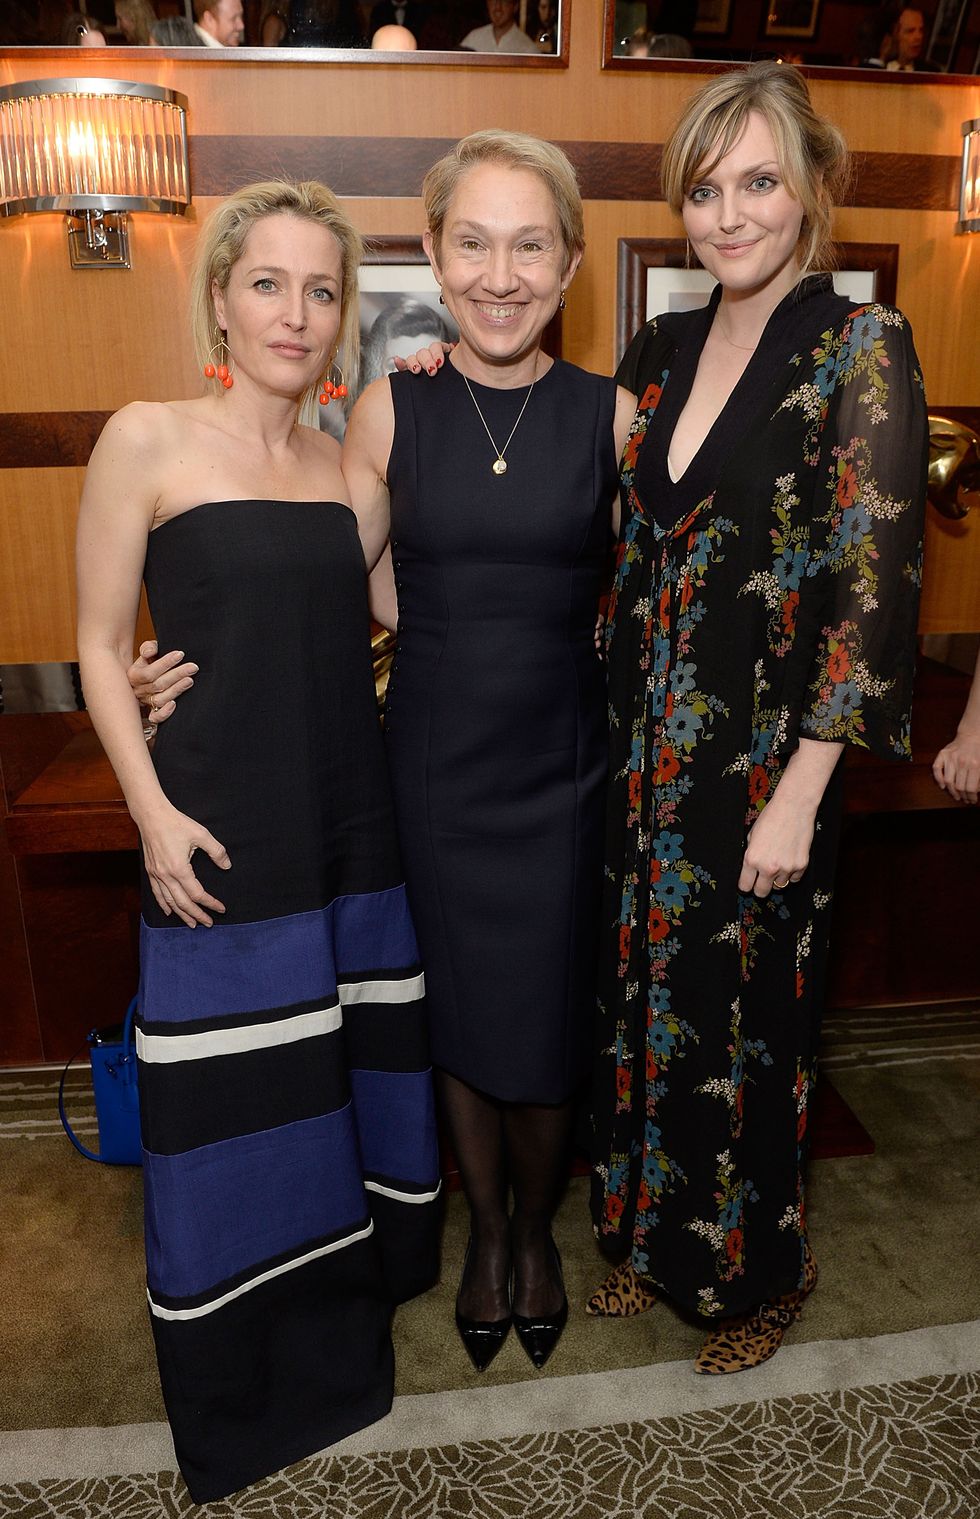 Justine Picardie's Dior by Avedon book launch dinner at the Beaumont Hotel